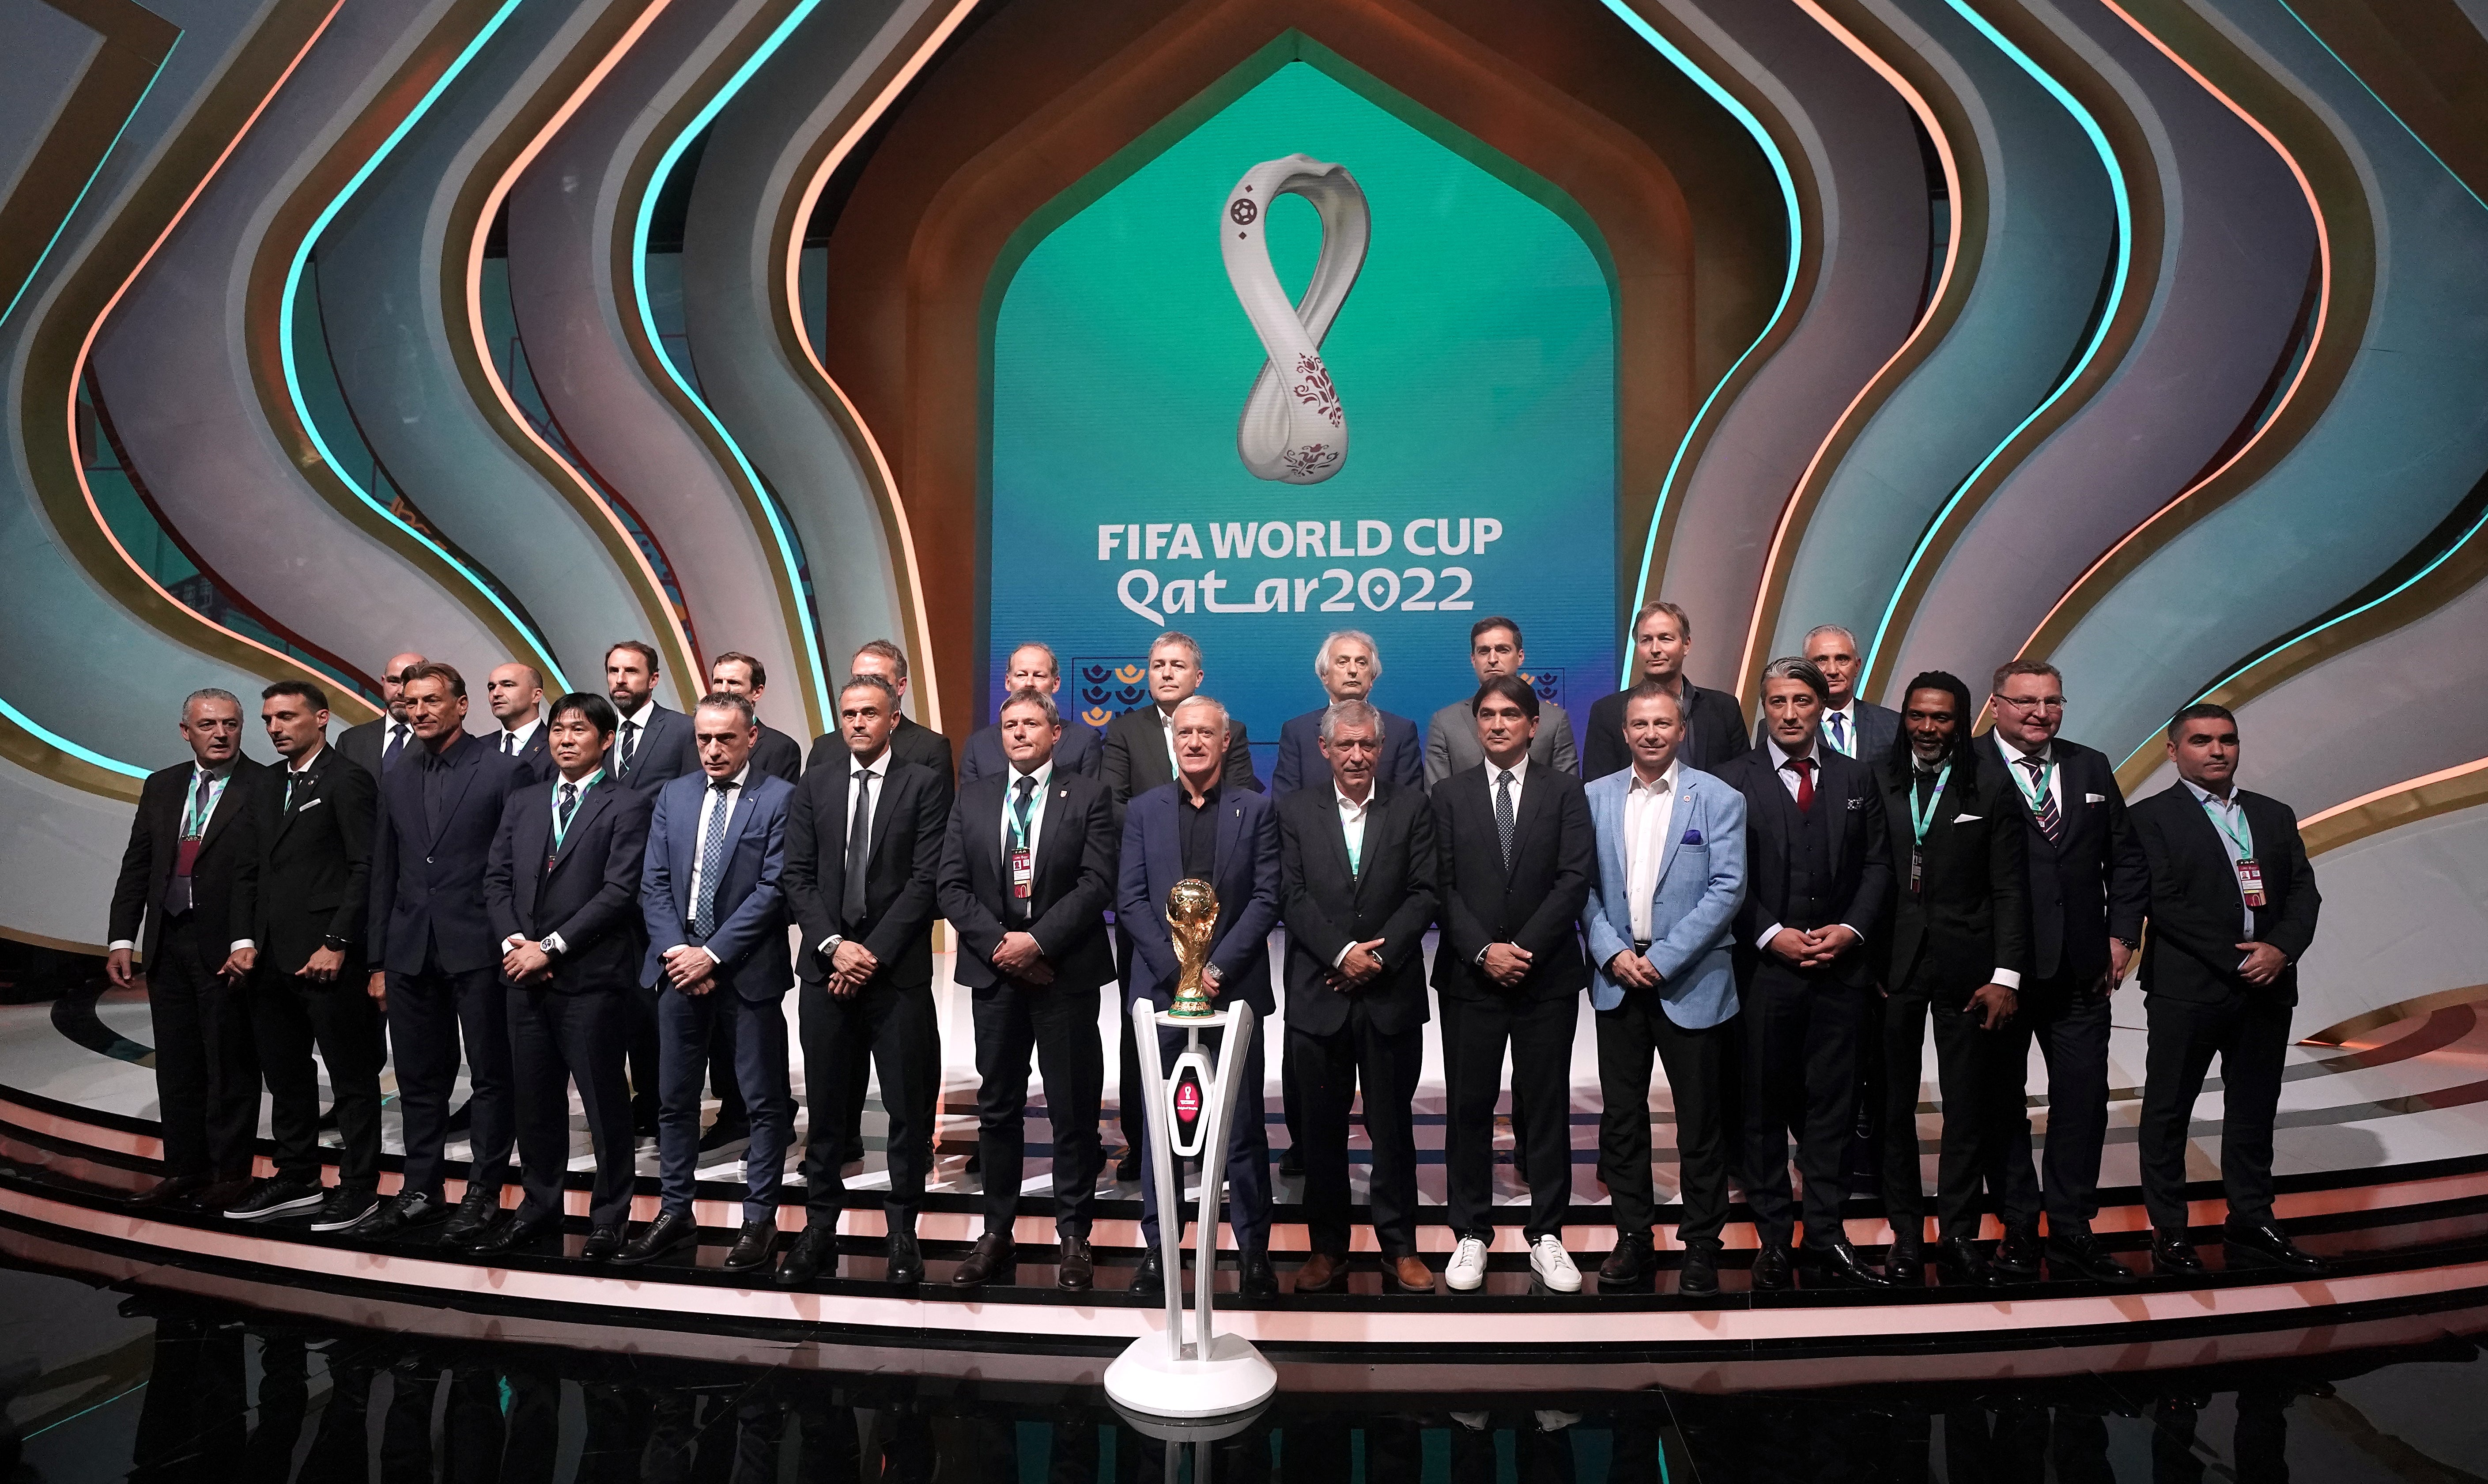 England manager Gareth Southgate (back row, third left) on stage during the World Cup Qatar 2022 draw at the Doha Exhibition and Convention Centre (Nick Potts/PA)